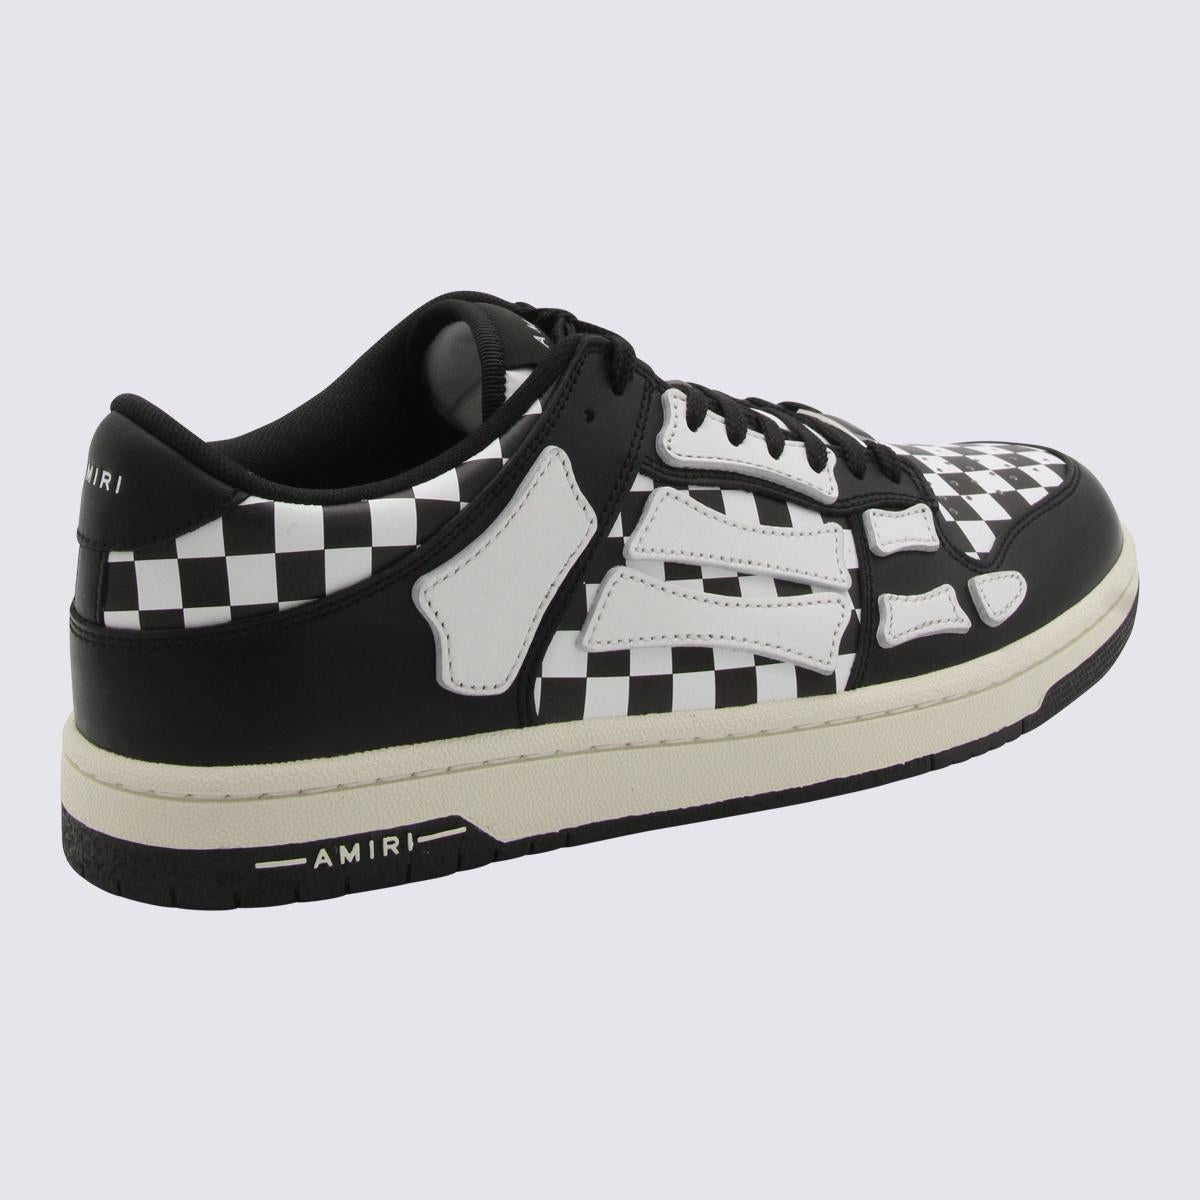 Shop Amiri Black And White Leather Sneakers